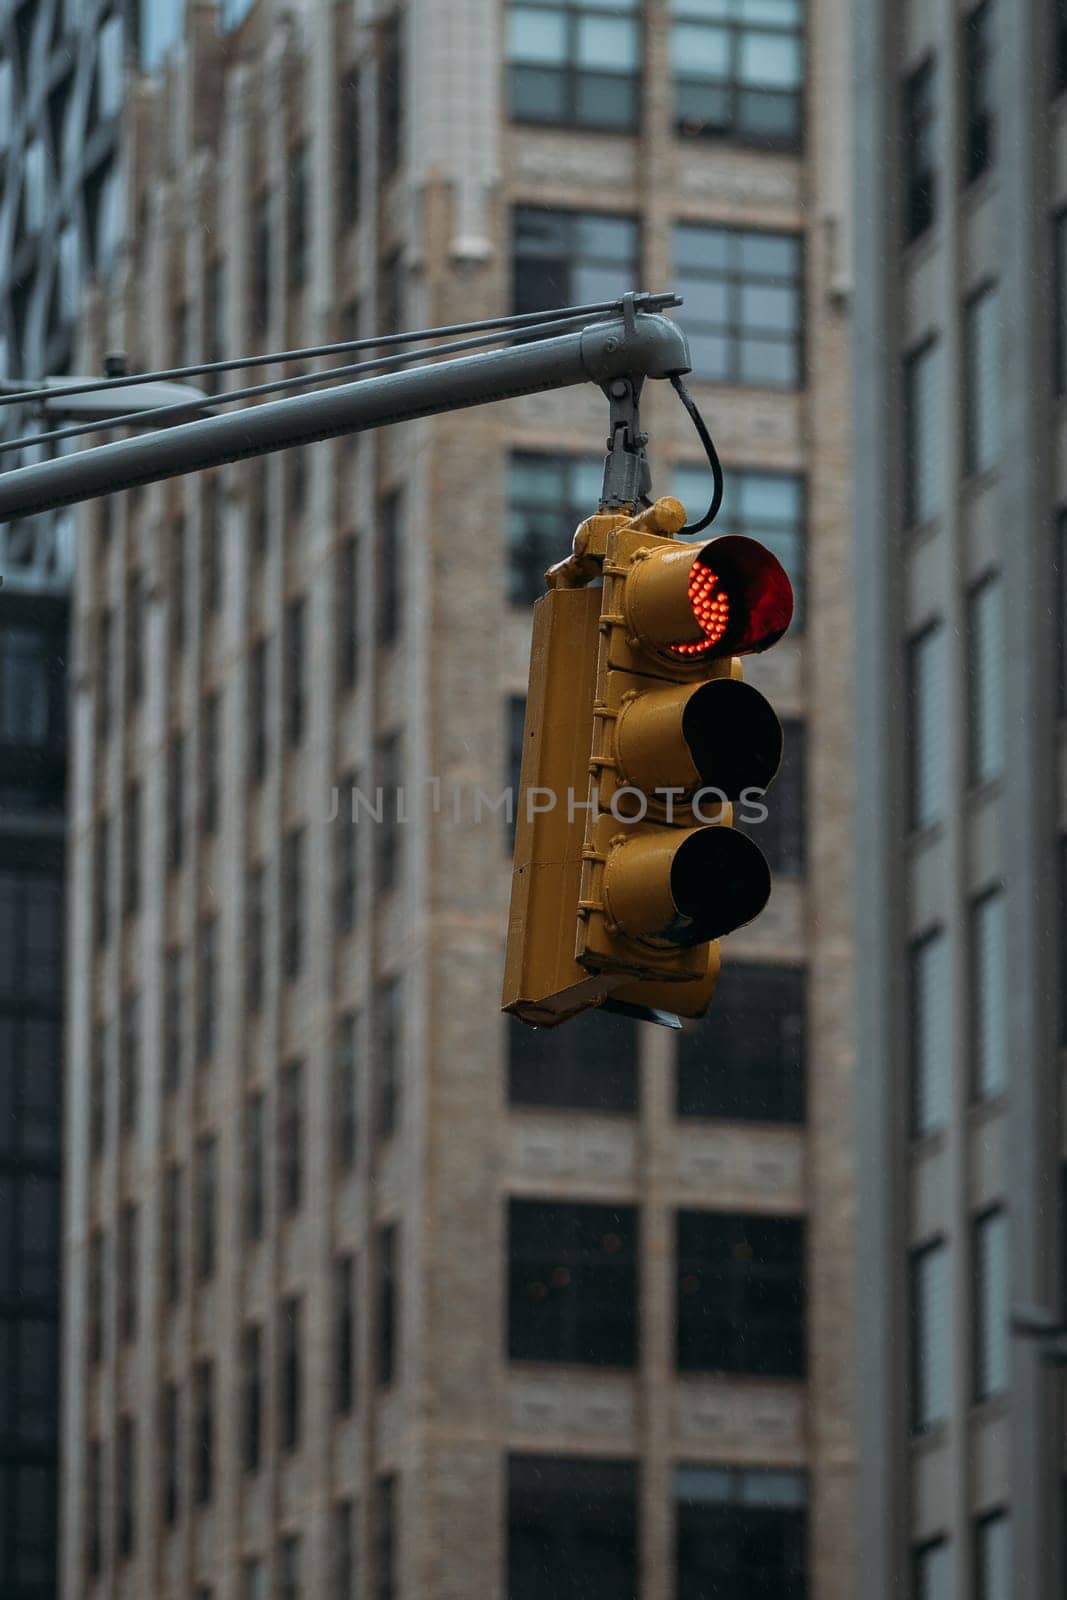 A traffic light stands in defiance of the towering urban backdrop.